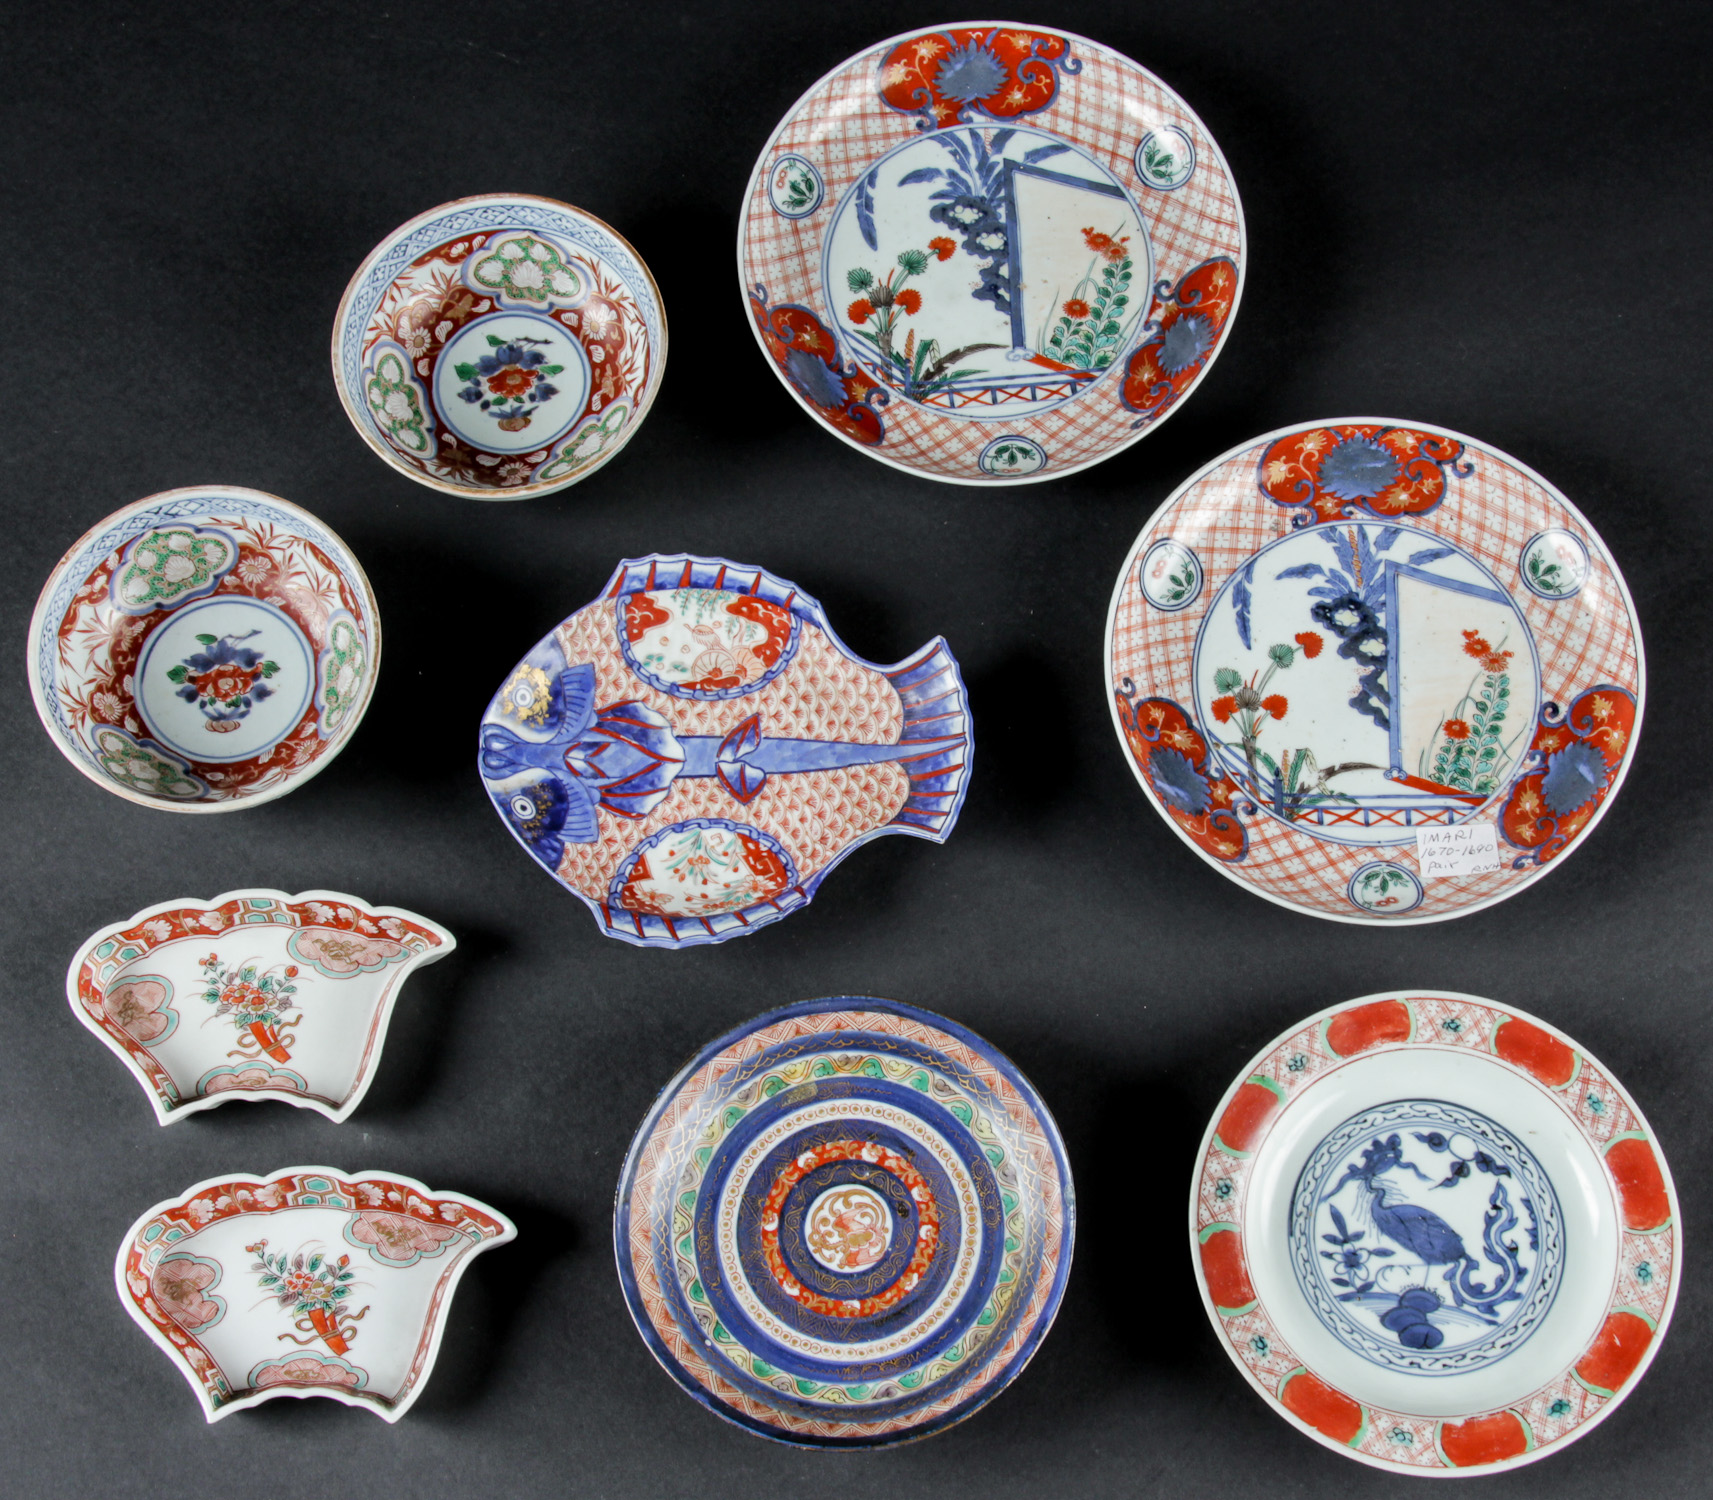 9 Antique Japanese Imari Porcelain Items. Consisting of a pair of Meiji period trapezoidal trays